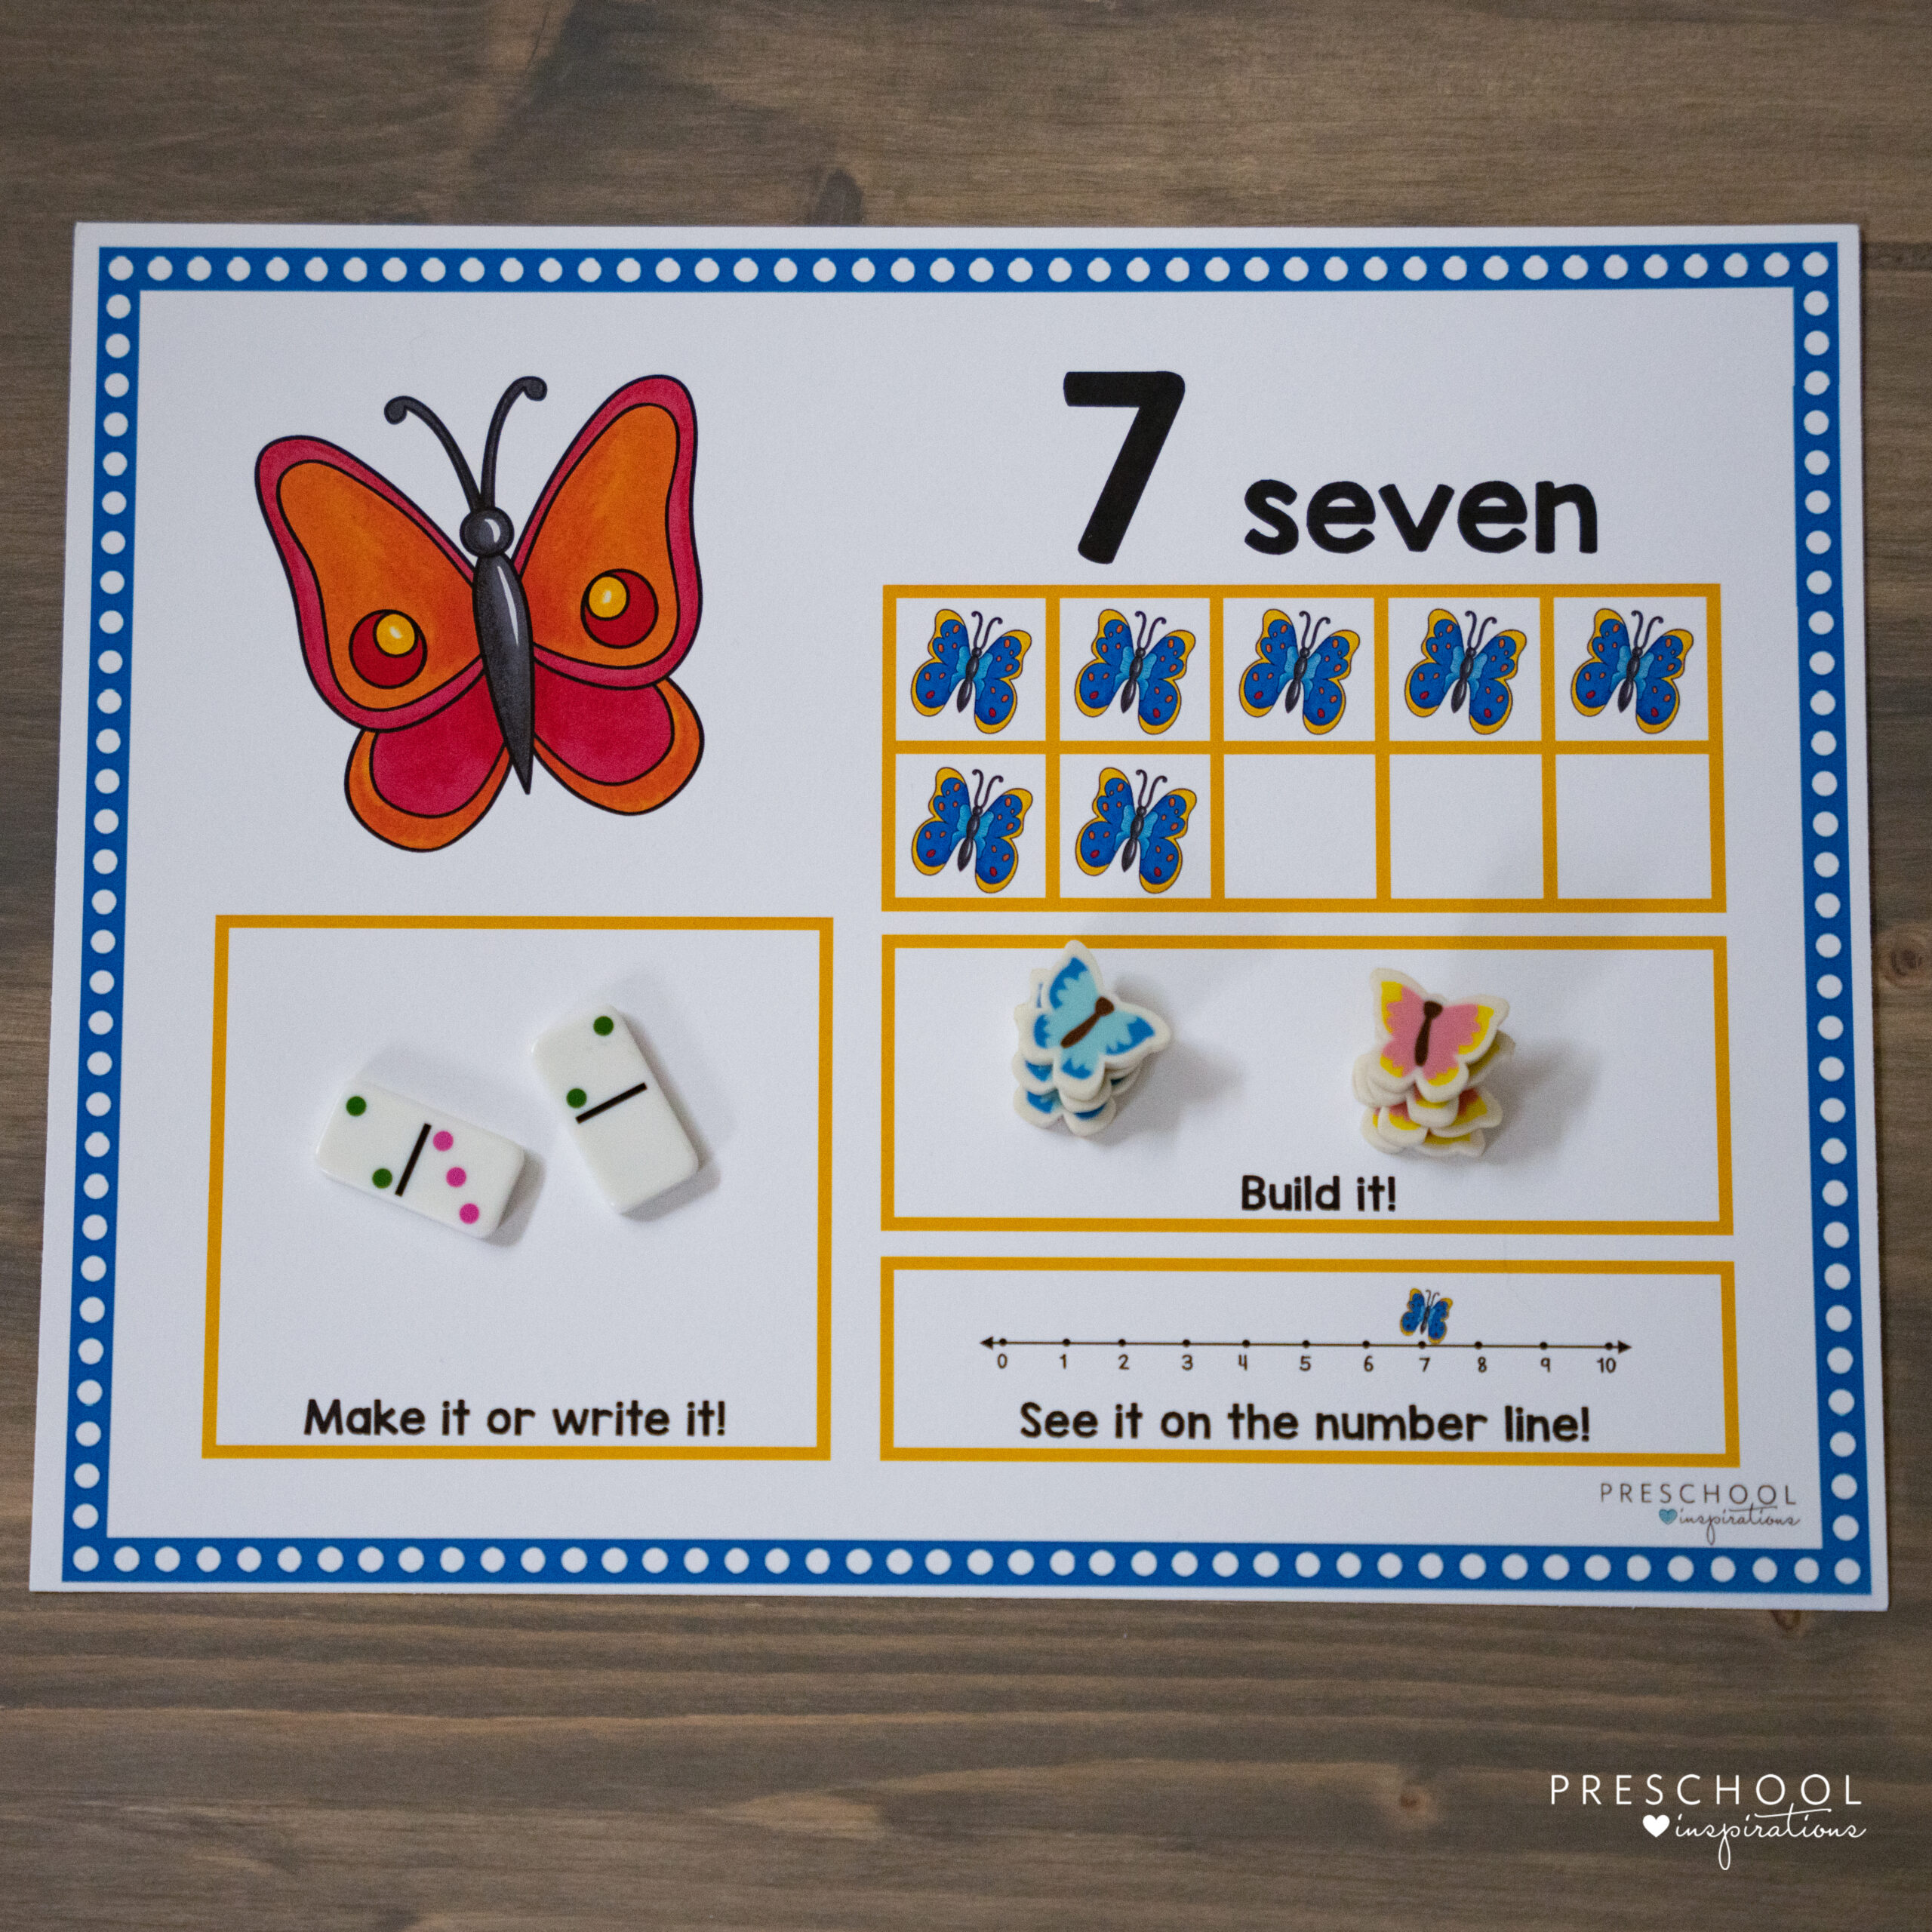 a butterfly ten frame counting mat for preschool that is prefilled with the number seven